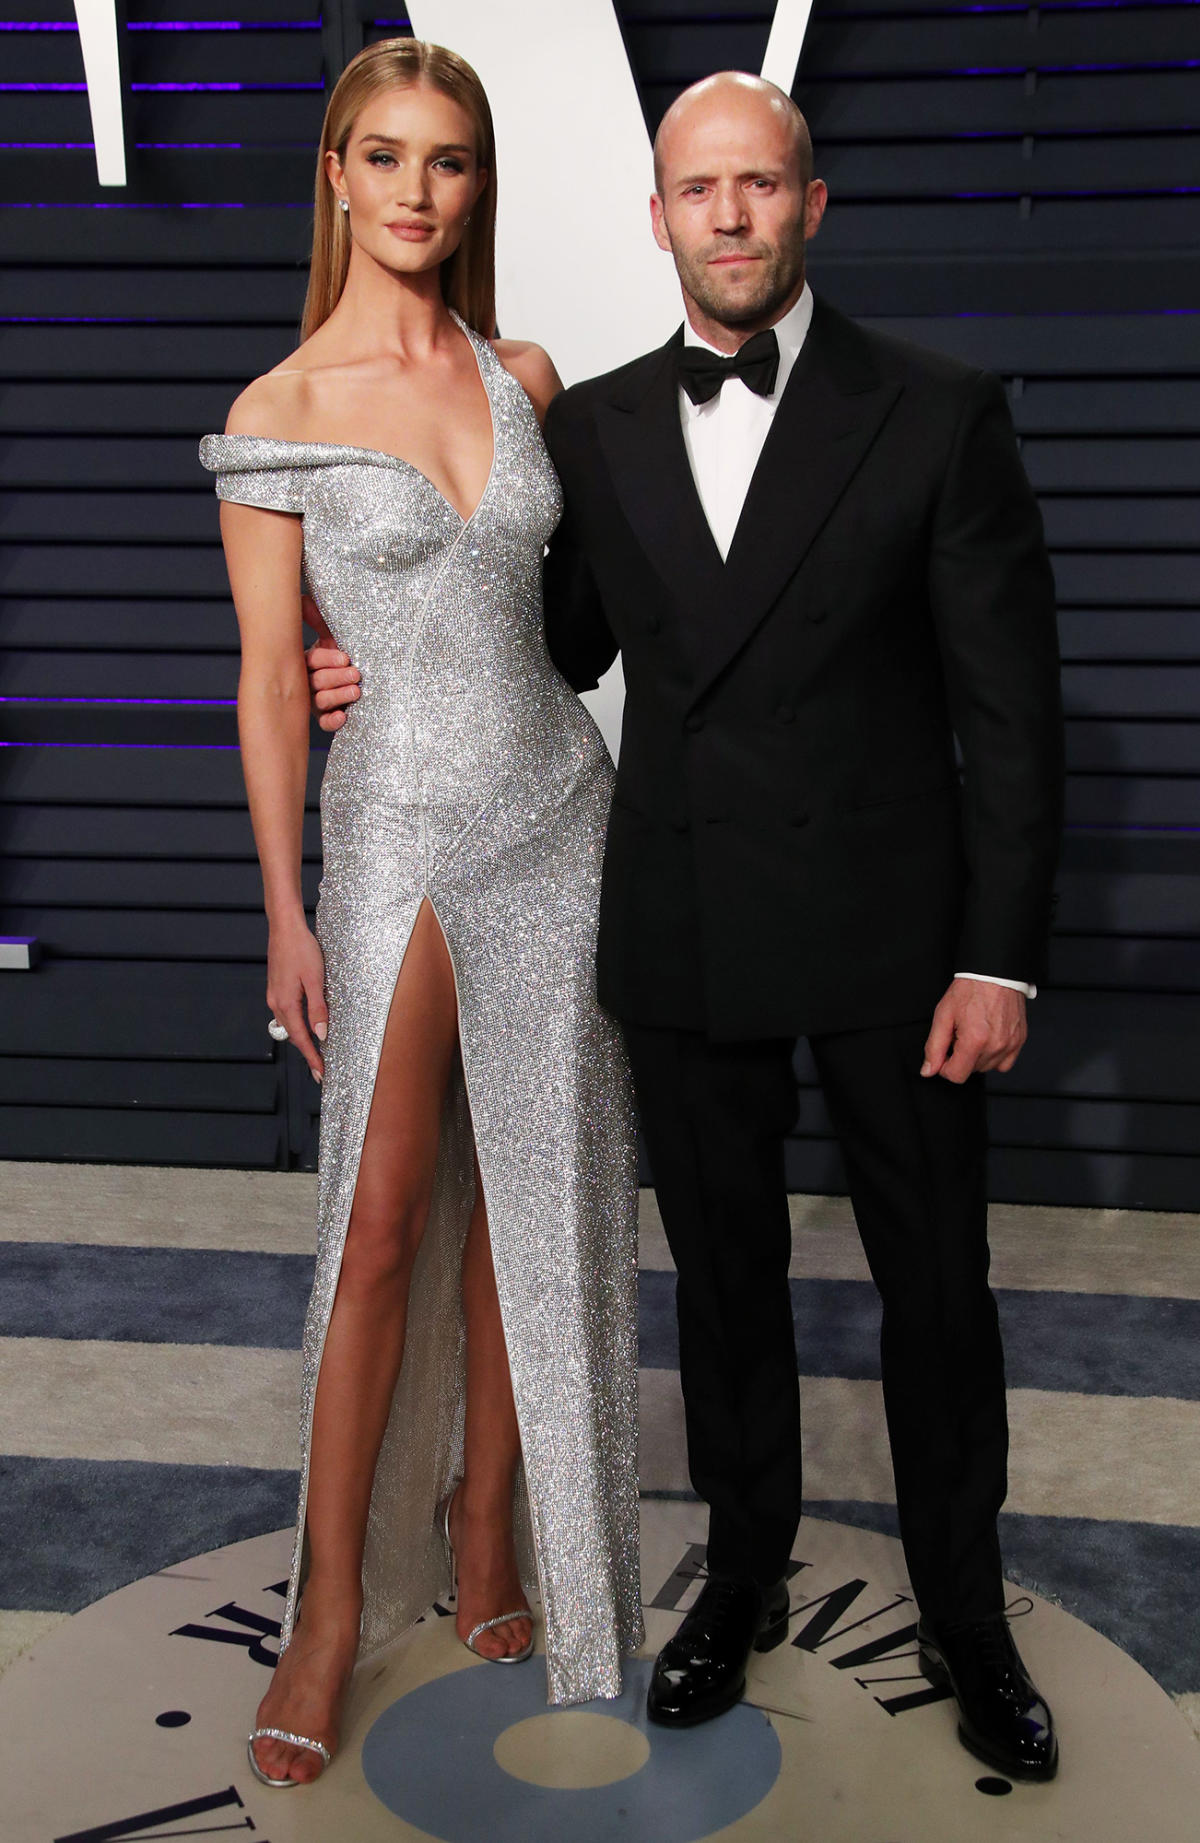 Discover the Stunning Love Story of Rosie Huntington-Whiteley and Jason Statham! 20